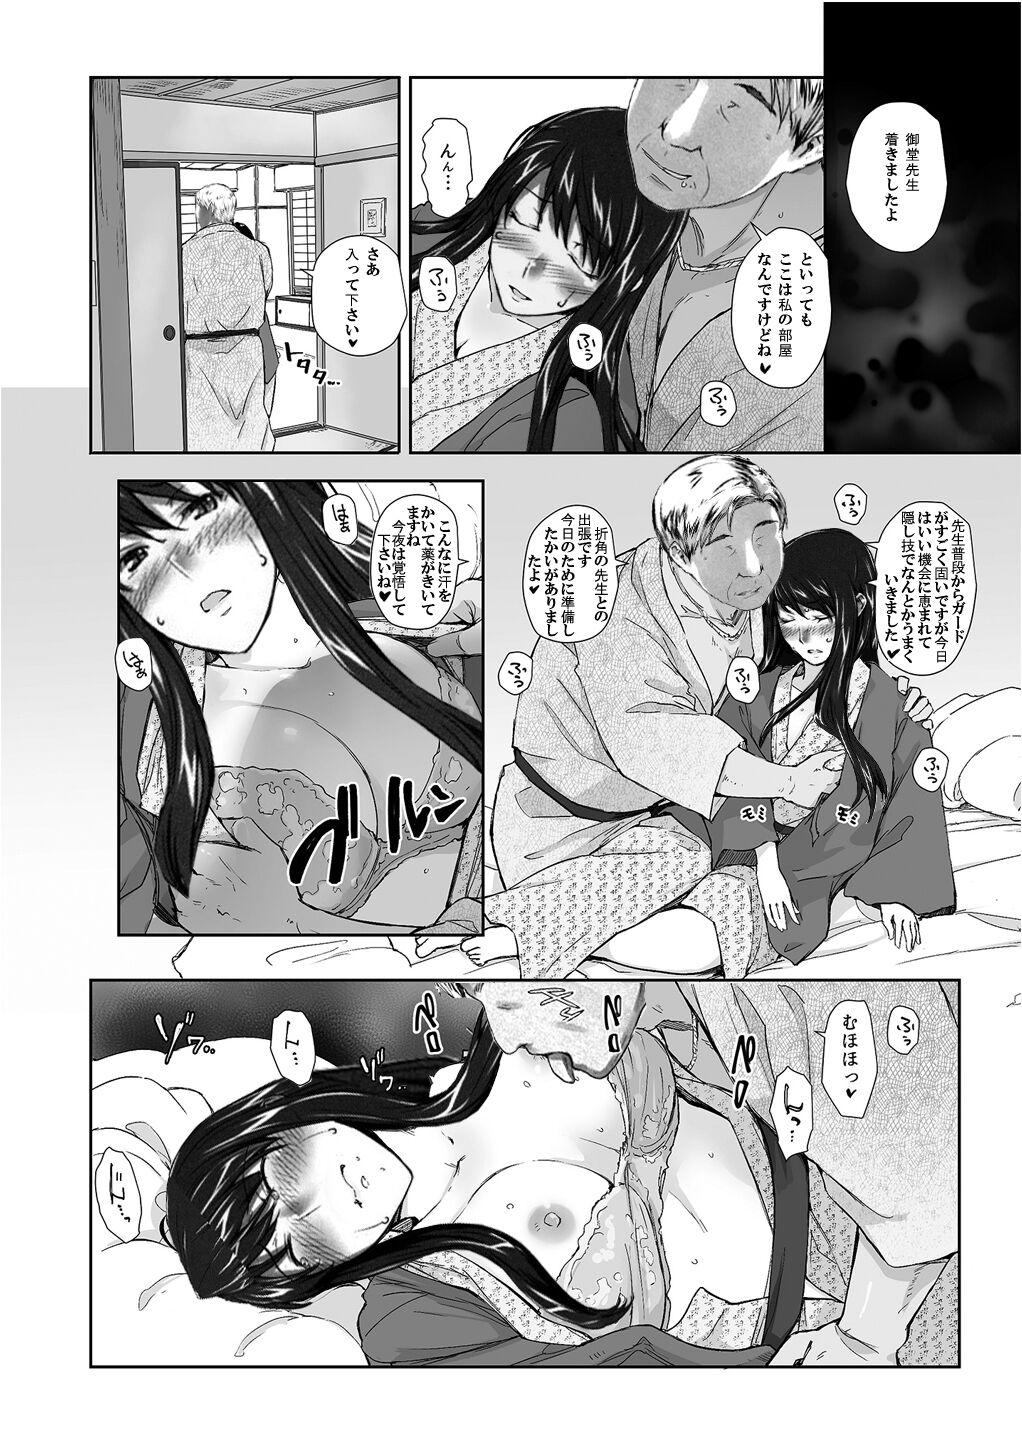 Sucking Cock Sakiko-san in delusion Vol.8 revised ~Sakiko-san's circumstance at an educational training Route3~ (collage) (Continue to “First day of study trip” (page 42) of Vol.1) Pay - Page 6